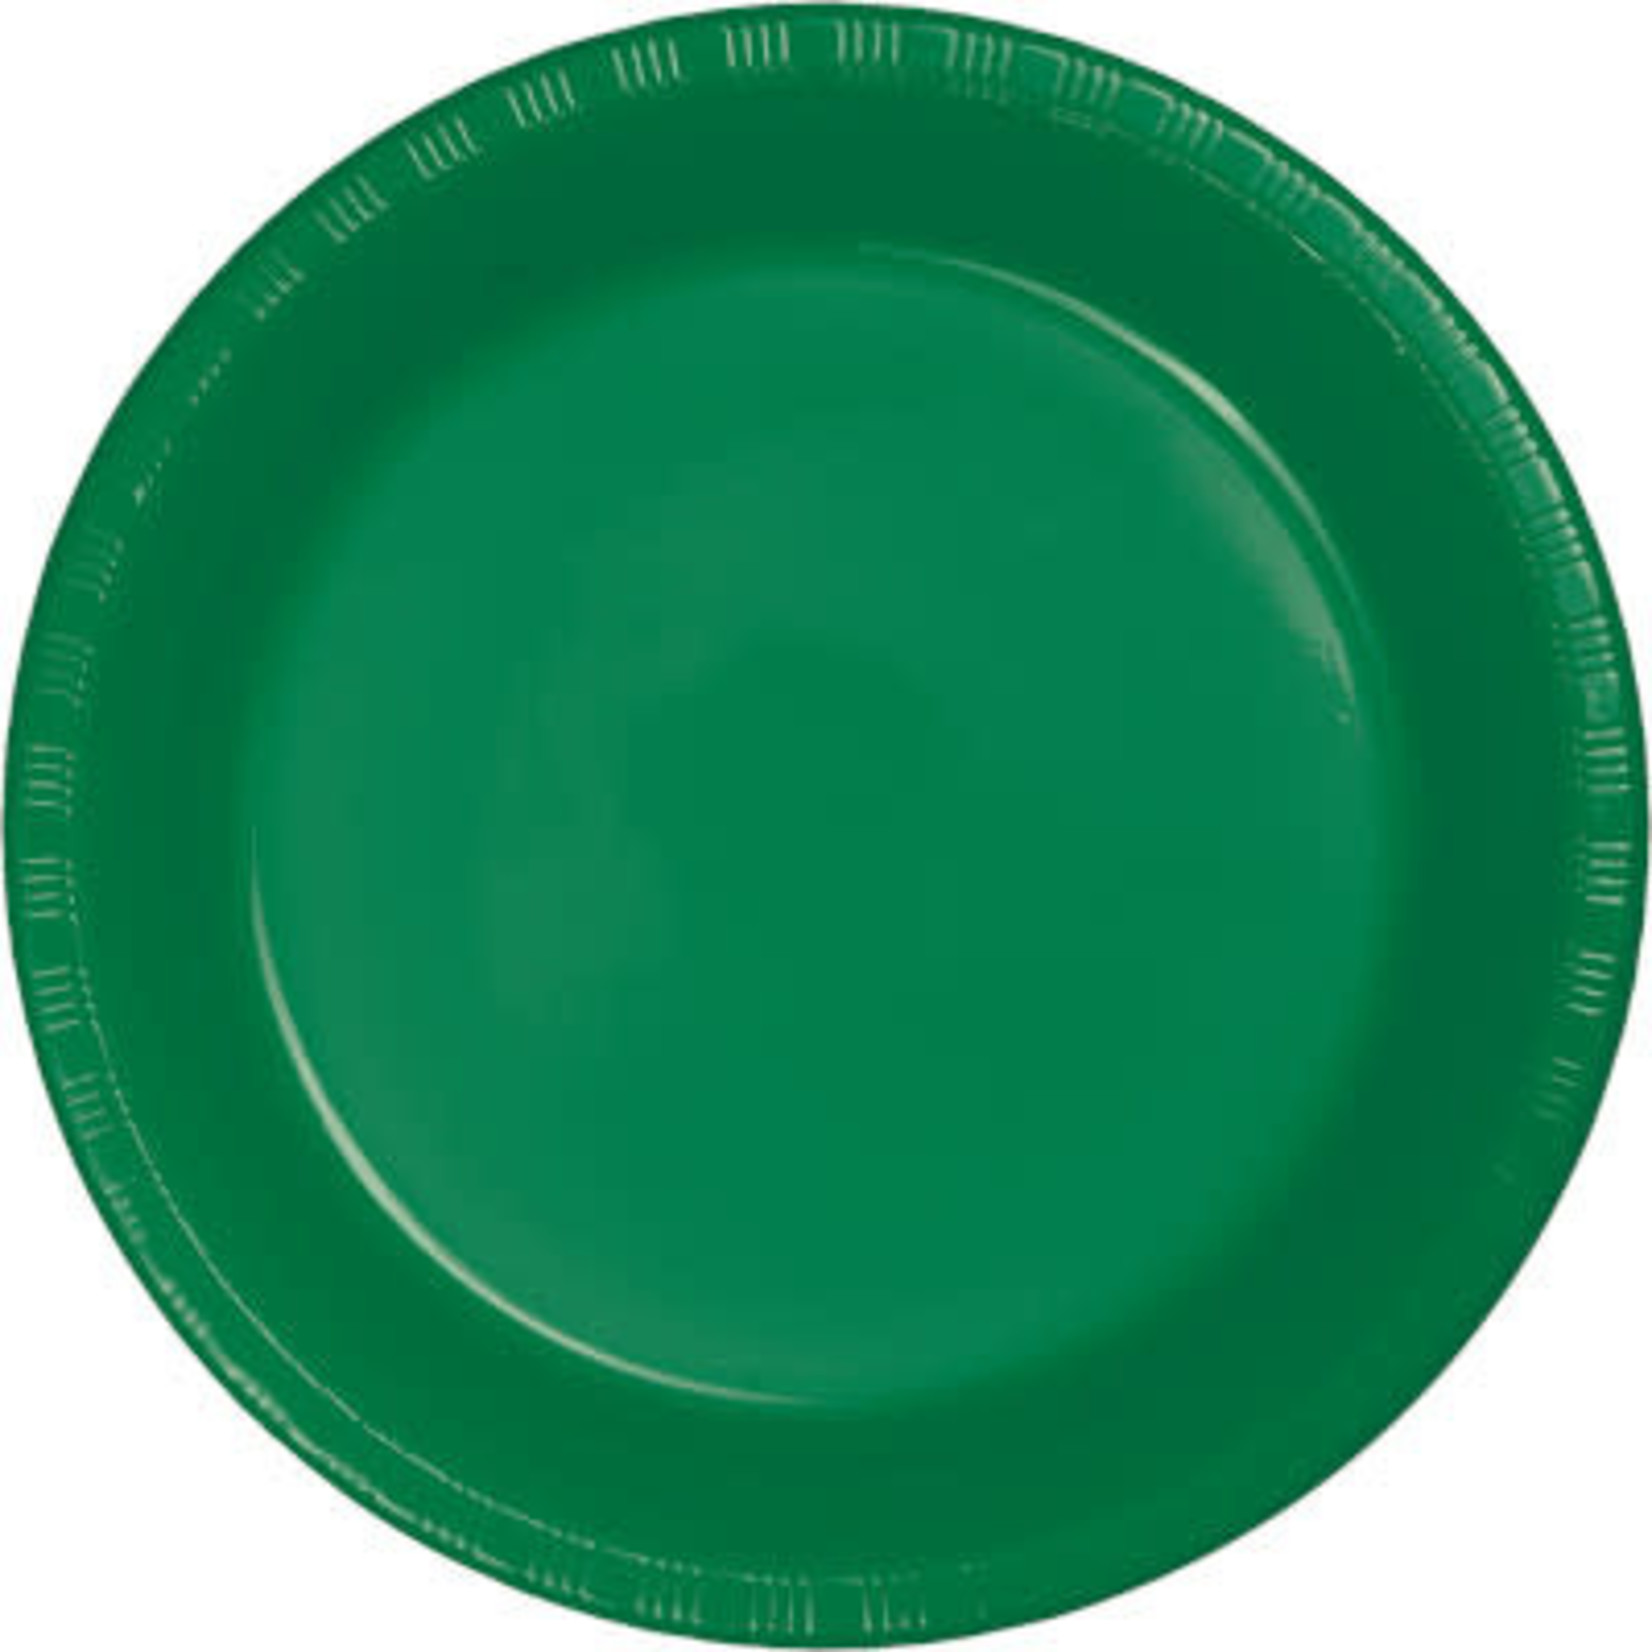 Touch of Color 7" Emerald Green Paper Plates - 24ct.